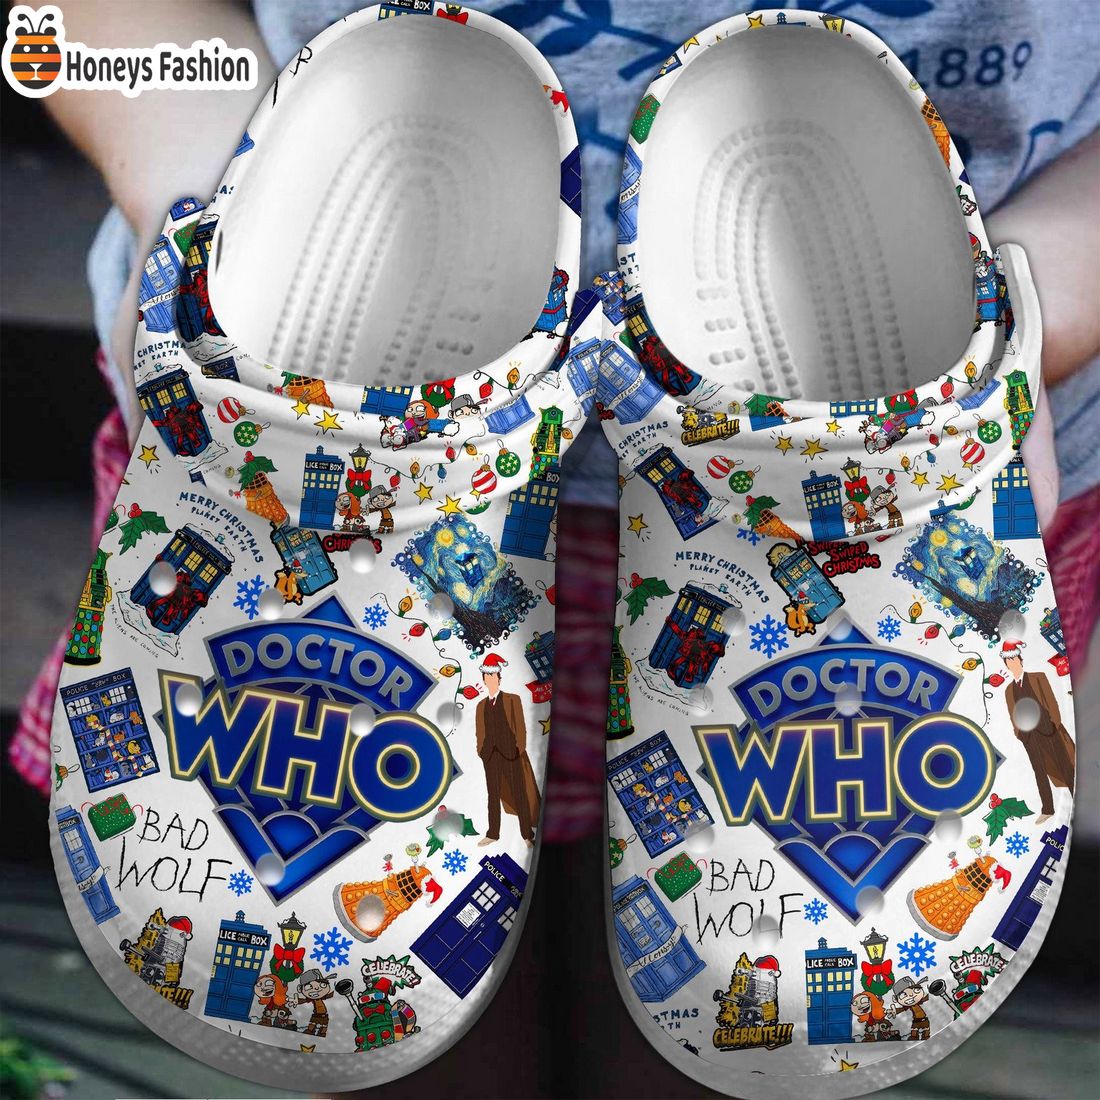 Doctor Who Bad Wolf Crocs Clog Shoes